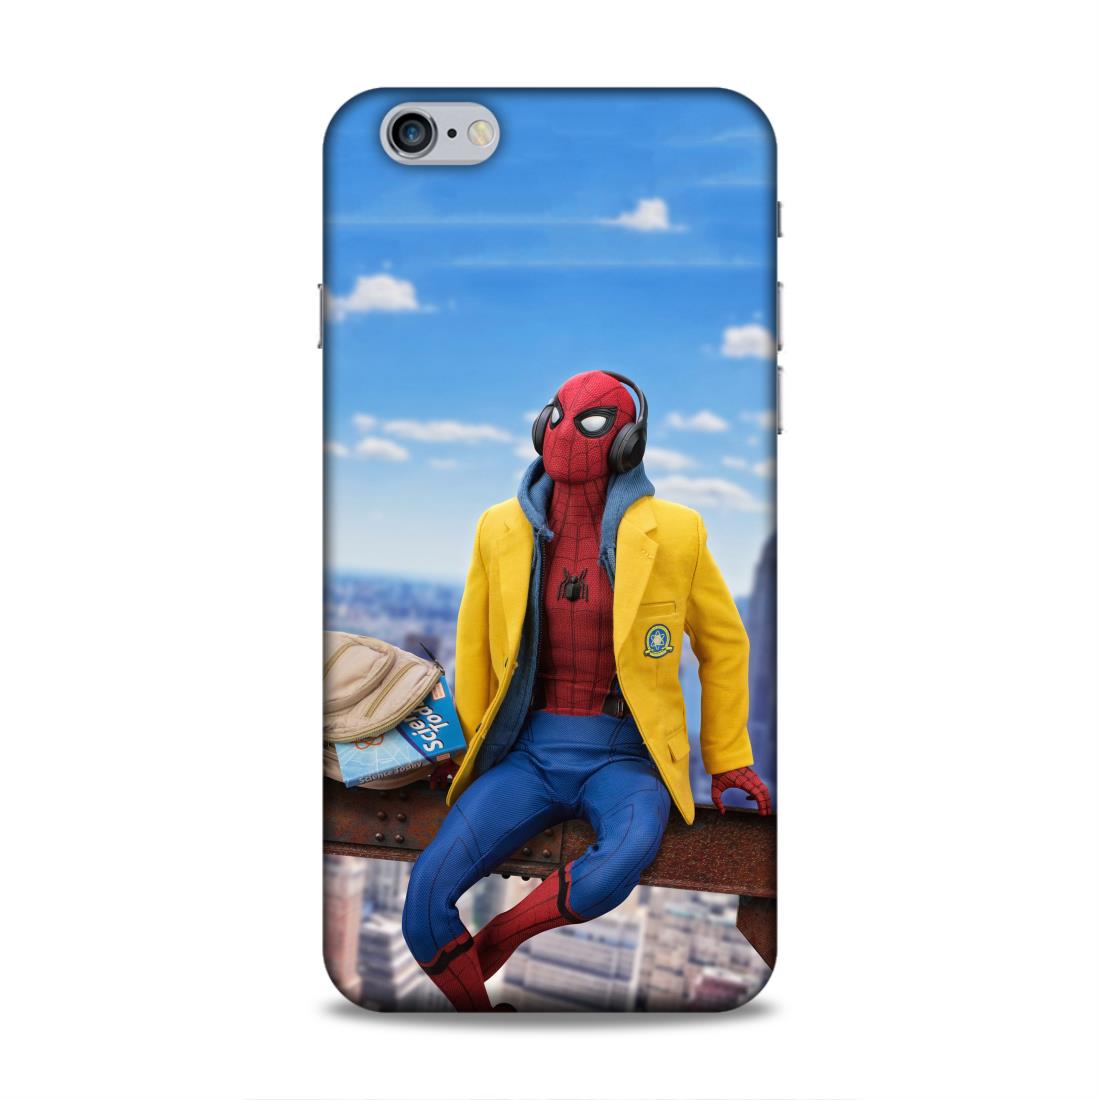 Cool Spiderman Hard Back Case For Apple iPhone 6 Plus / 6s Plus